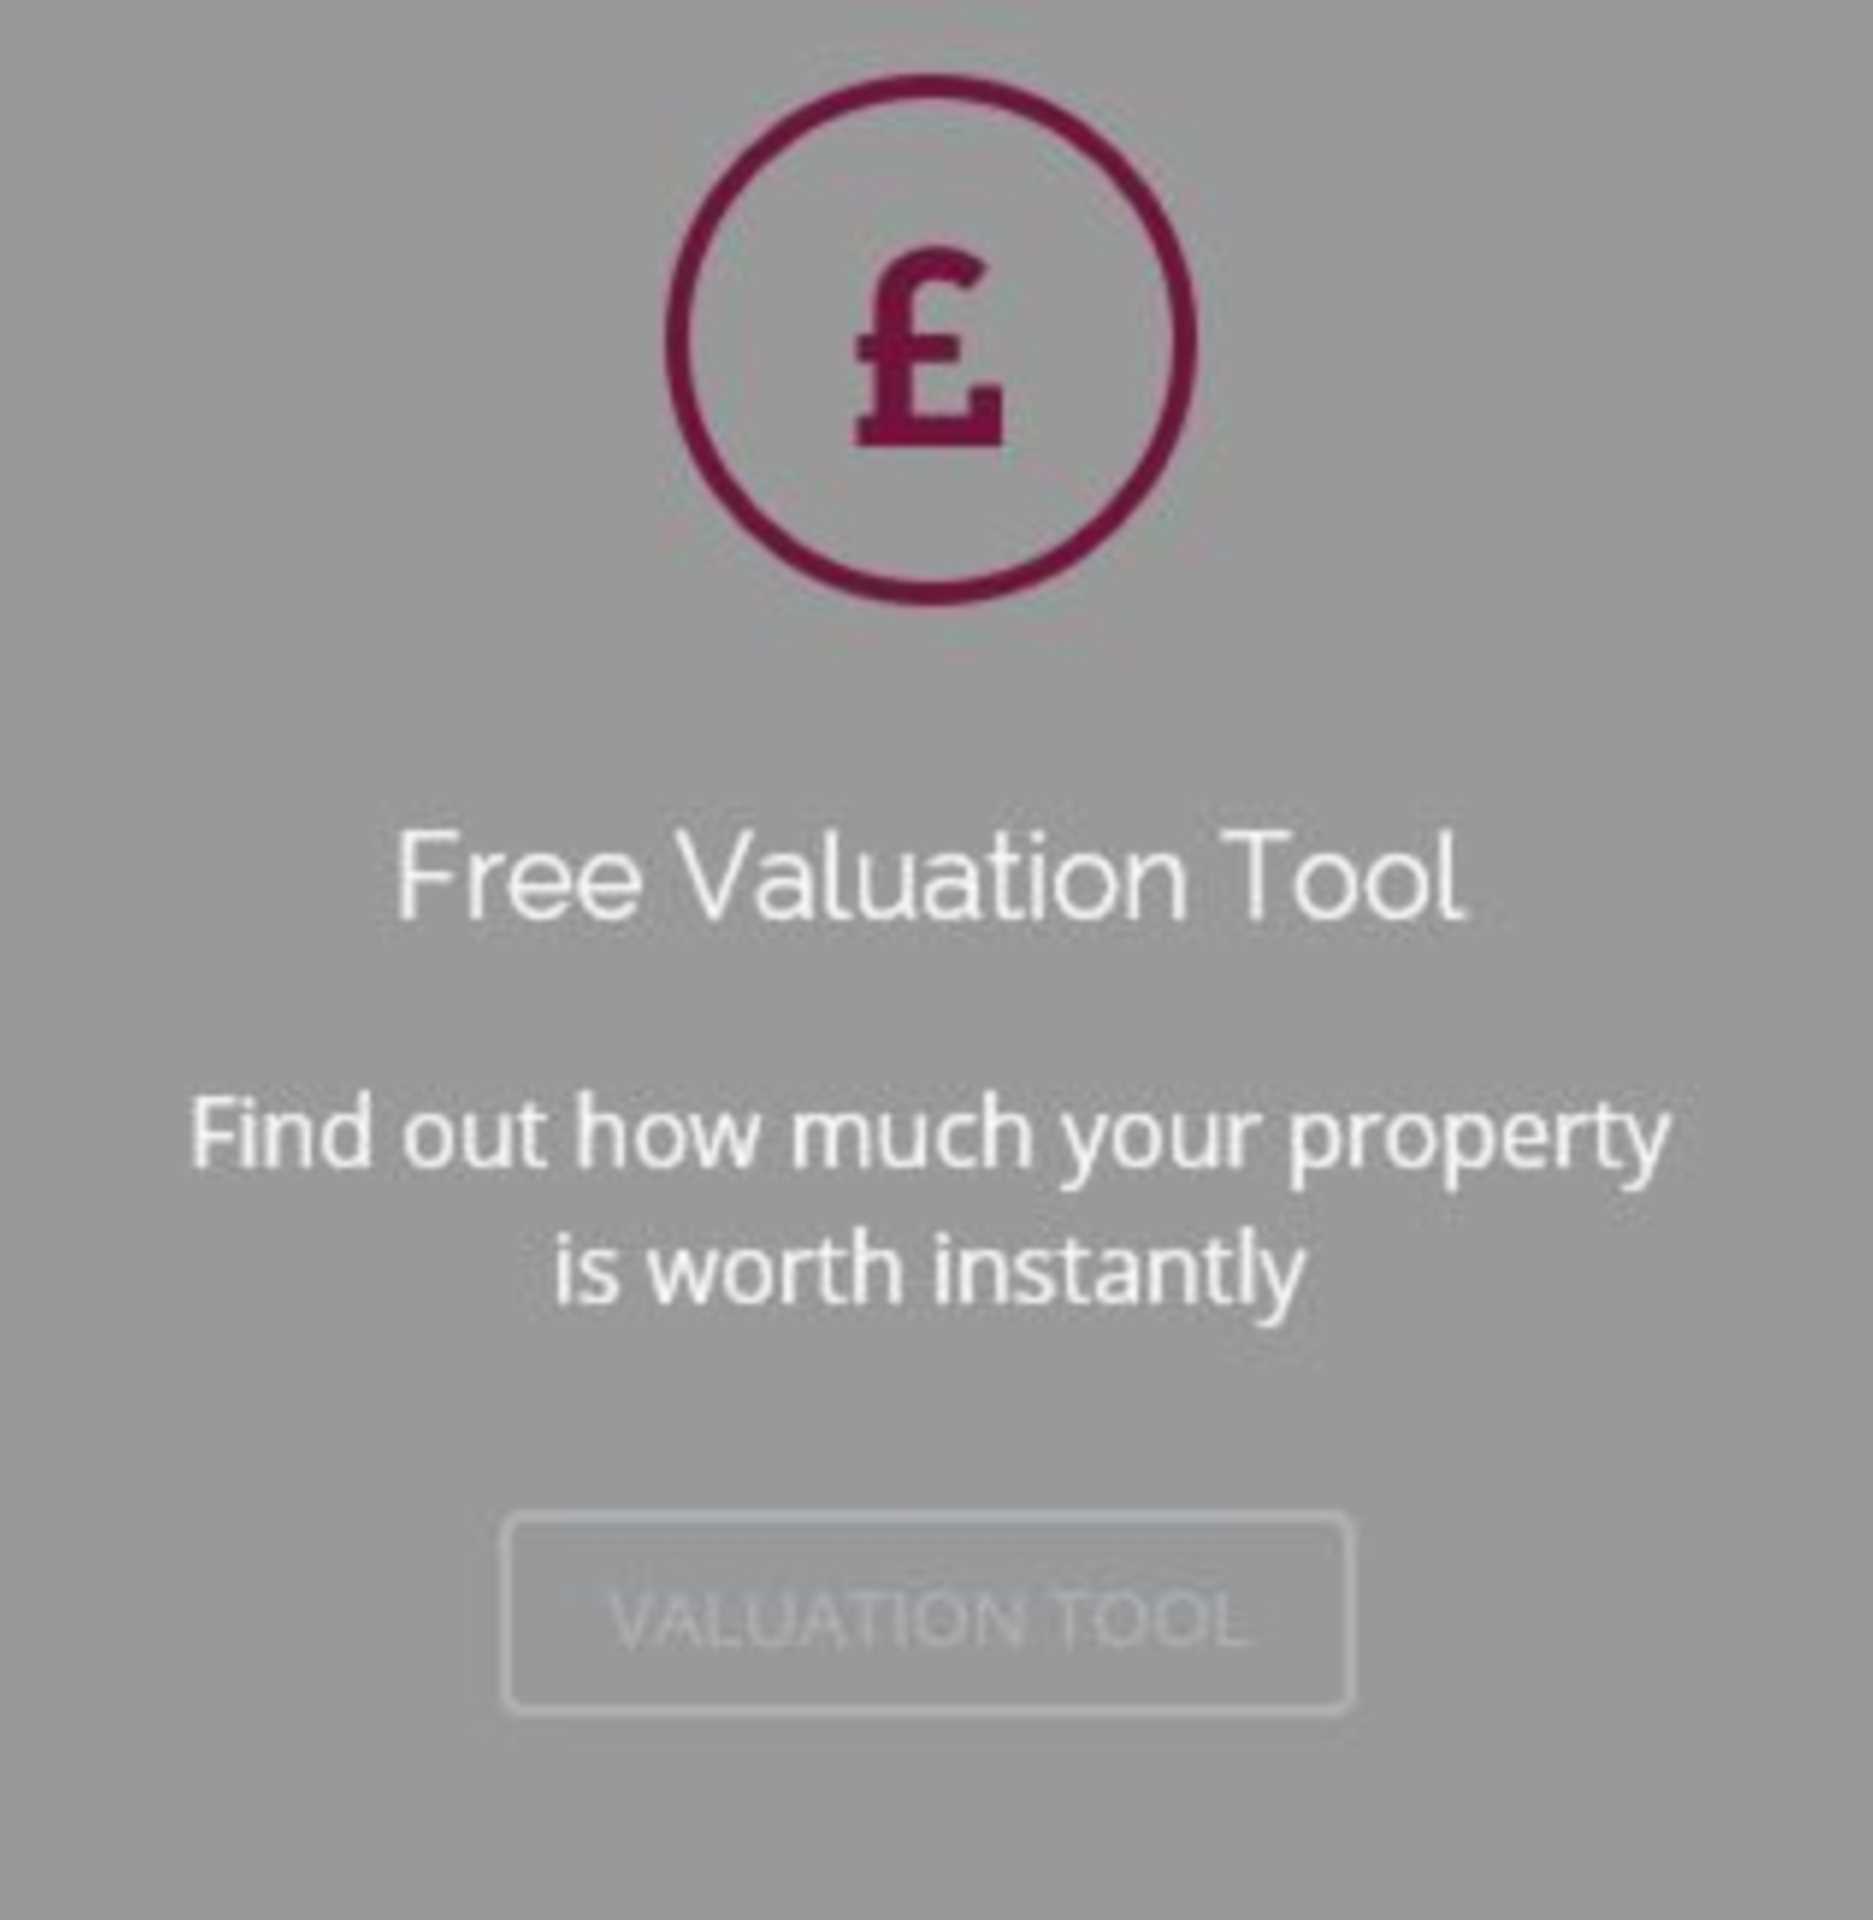 Get an online valuation of your property in seconds!